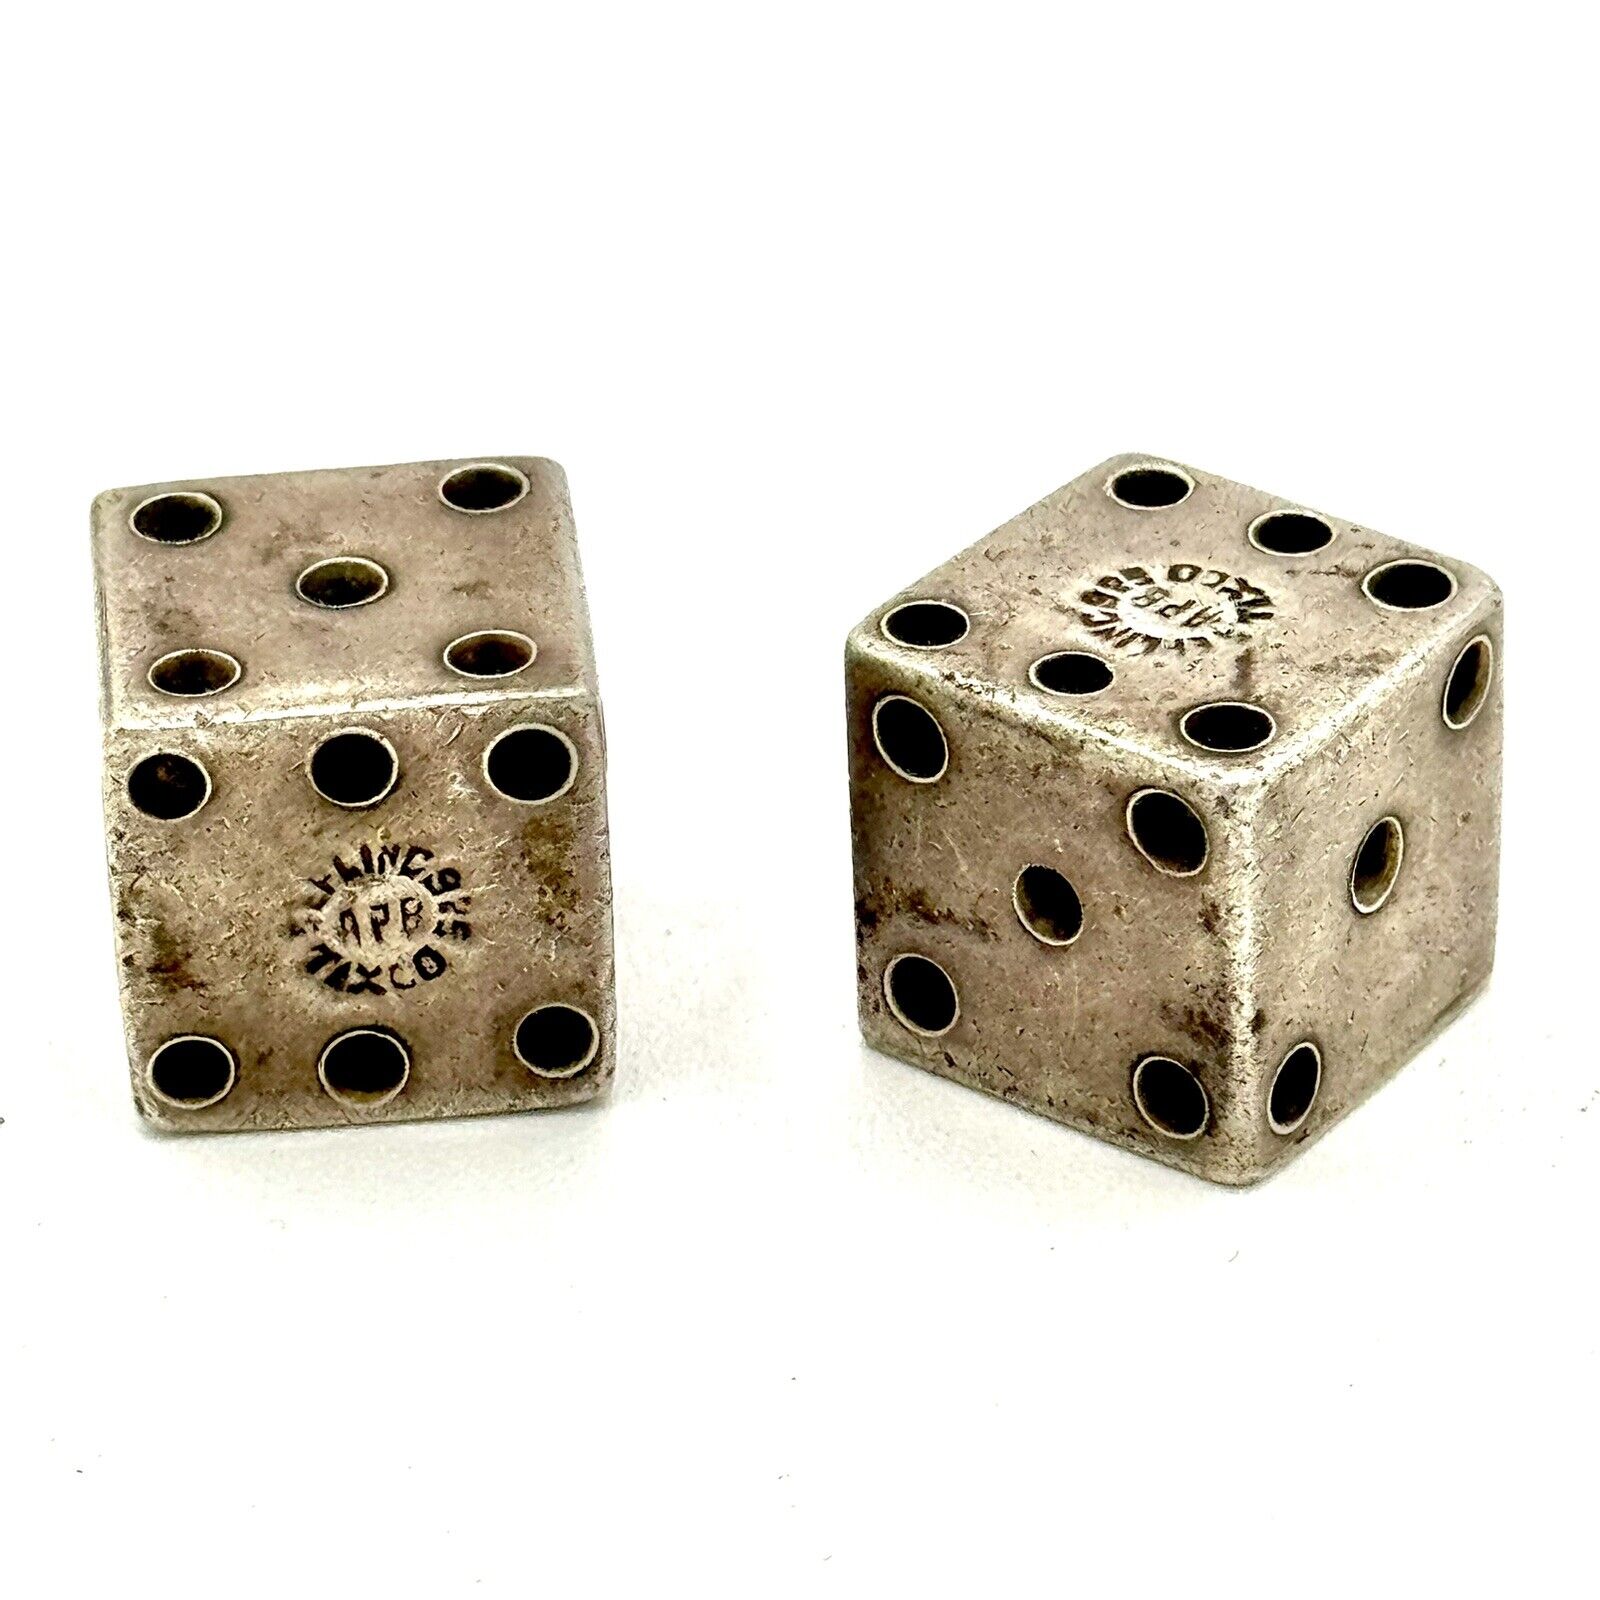 Taxco Fine Silver .925 Dice Set Patina Intact Loaded Movie Prop Vintage Gambling